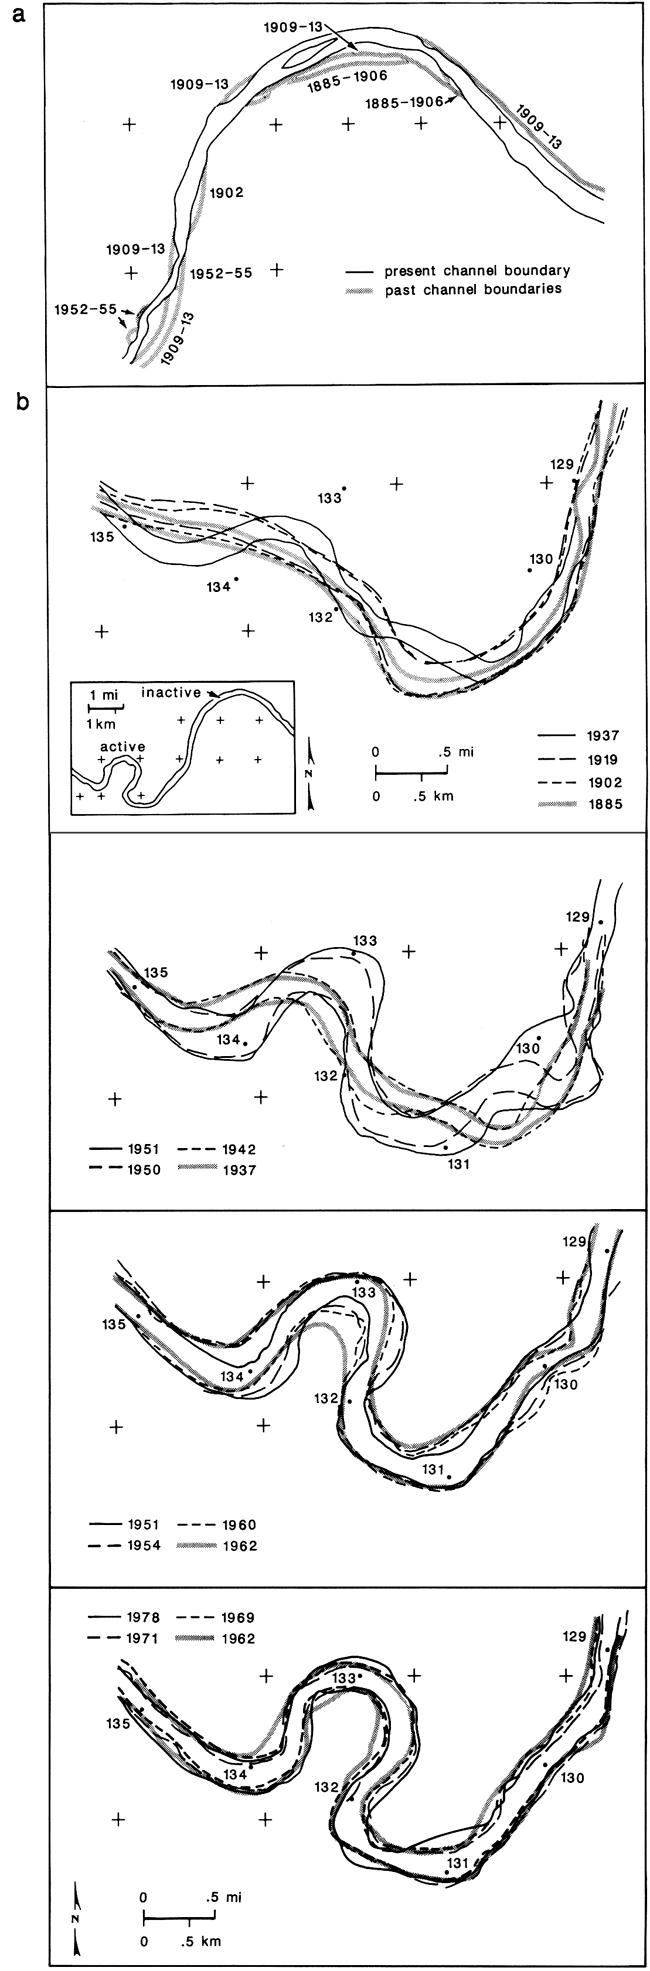 1 map from and inactive channel and 4 from an active area of the river channel.